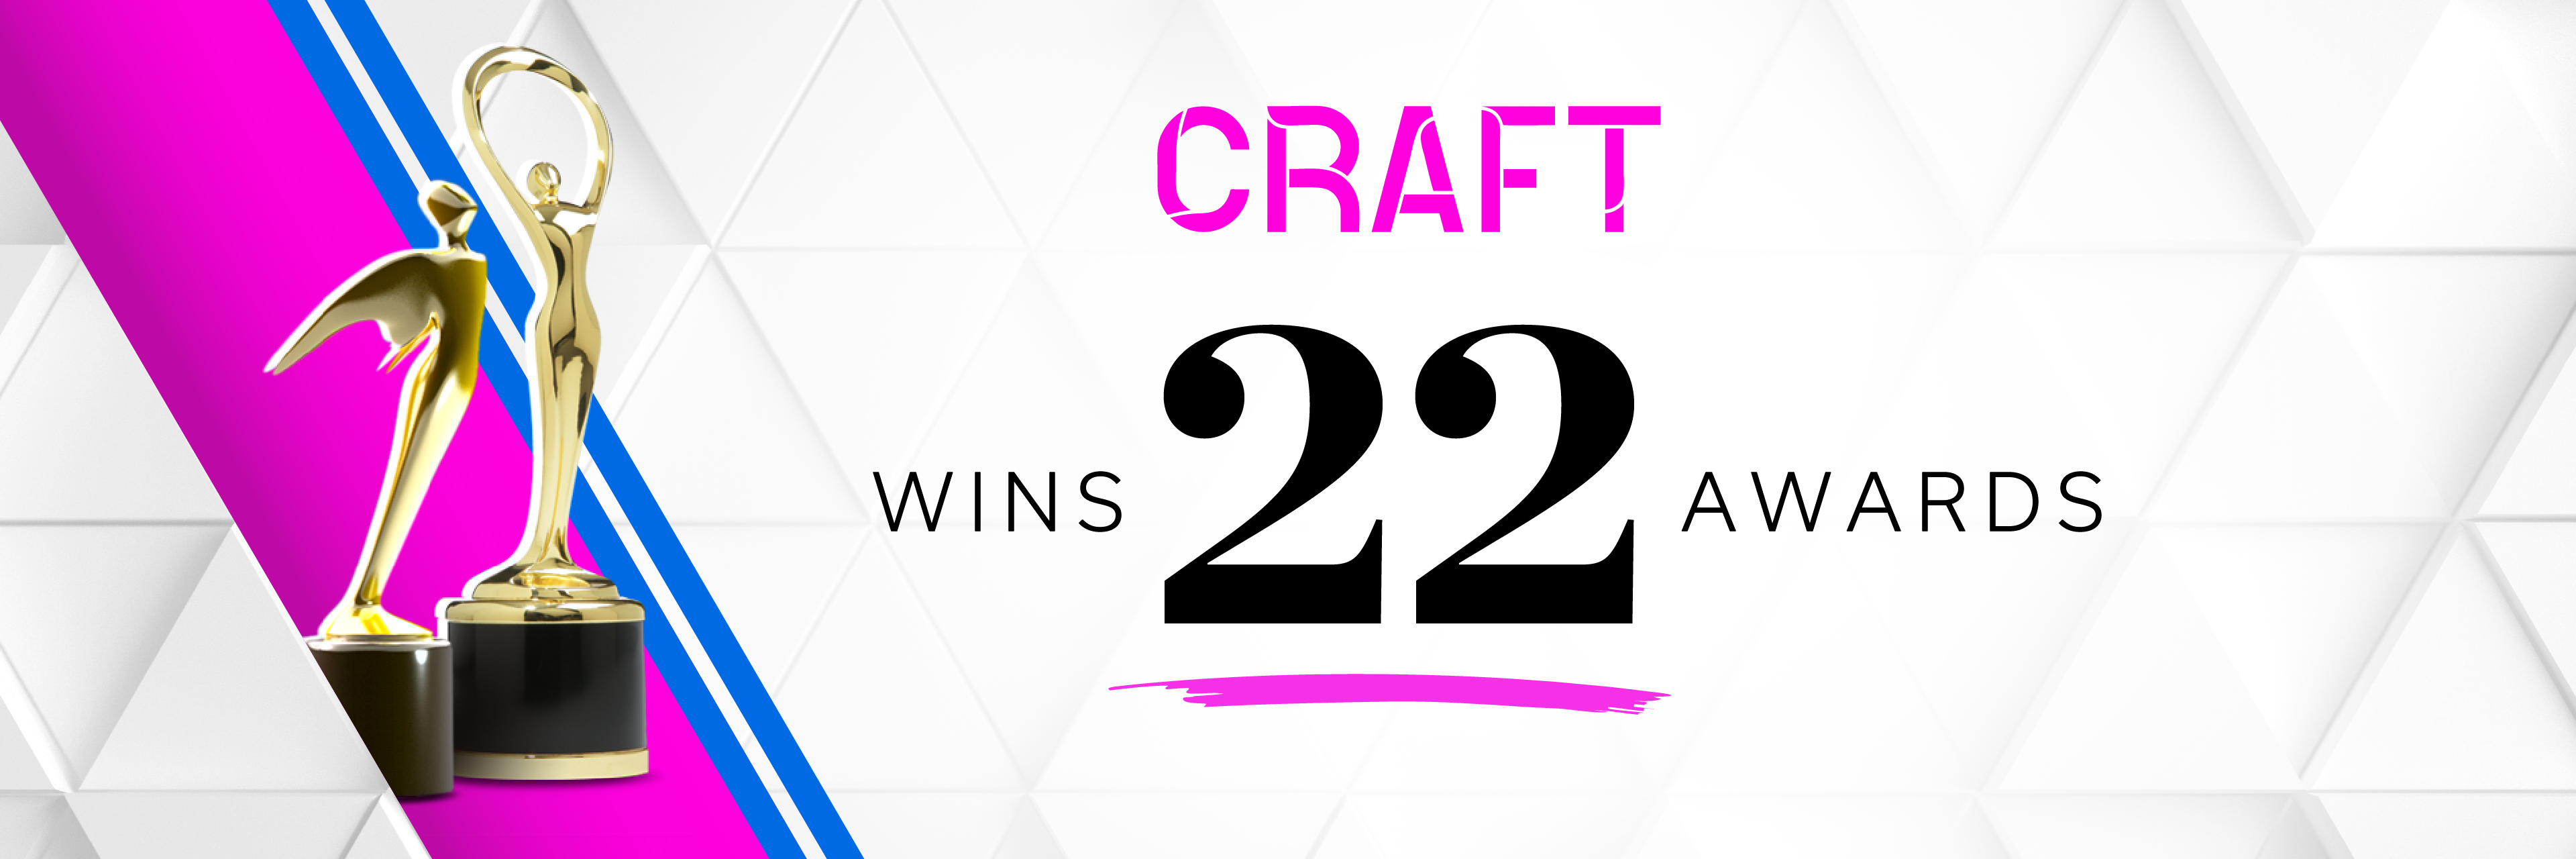 CRAFT WINS 22 AWARDS IN 2021